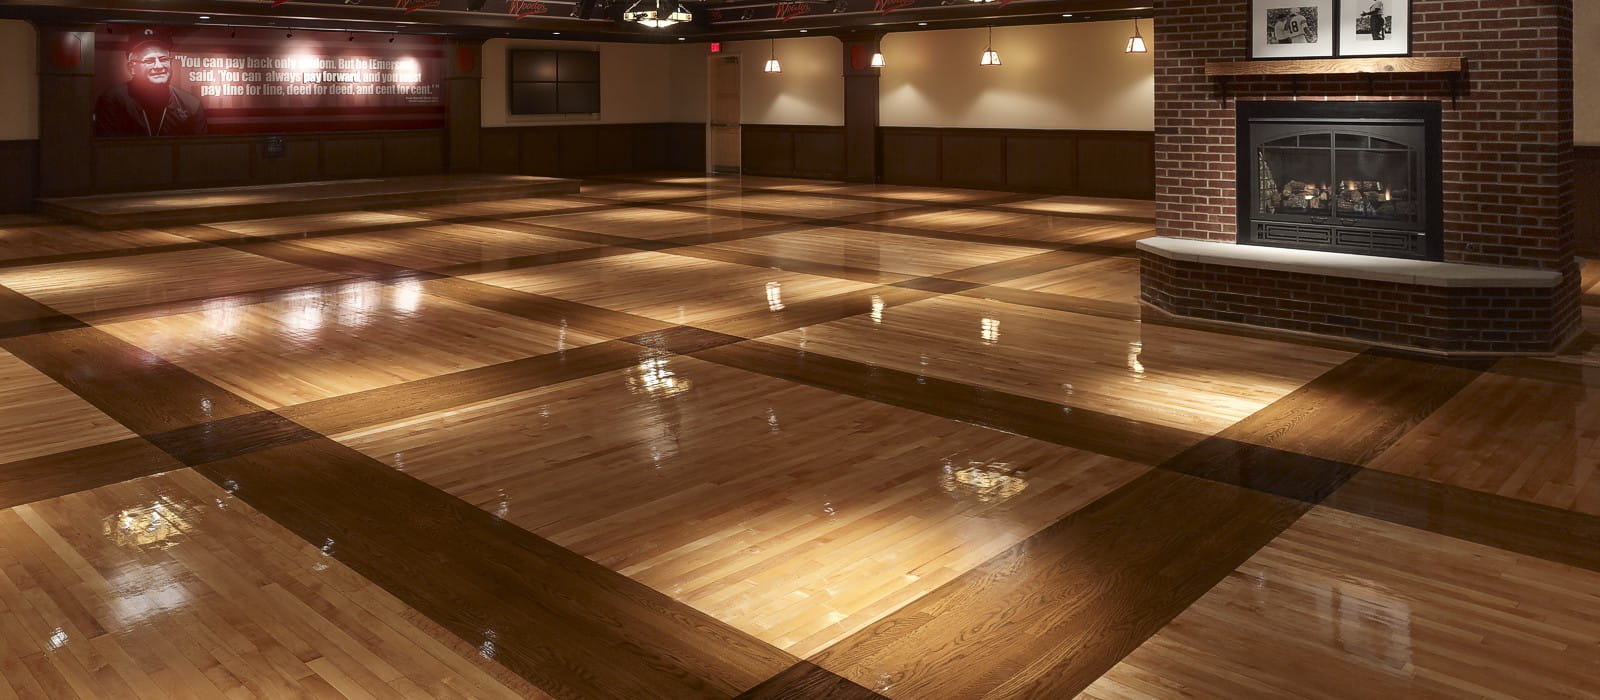 Our multipurpose synthetic floors are perfect for building basketball courts or large event spaces.